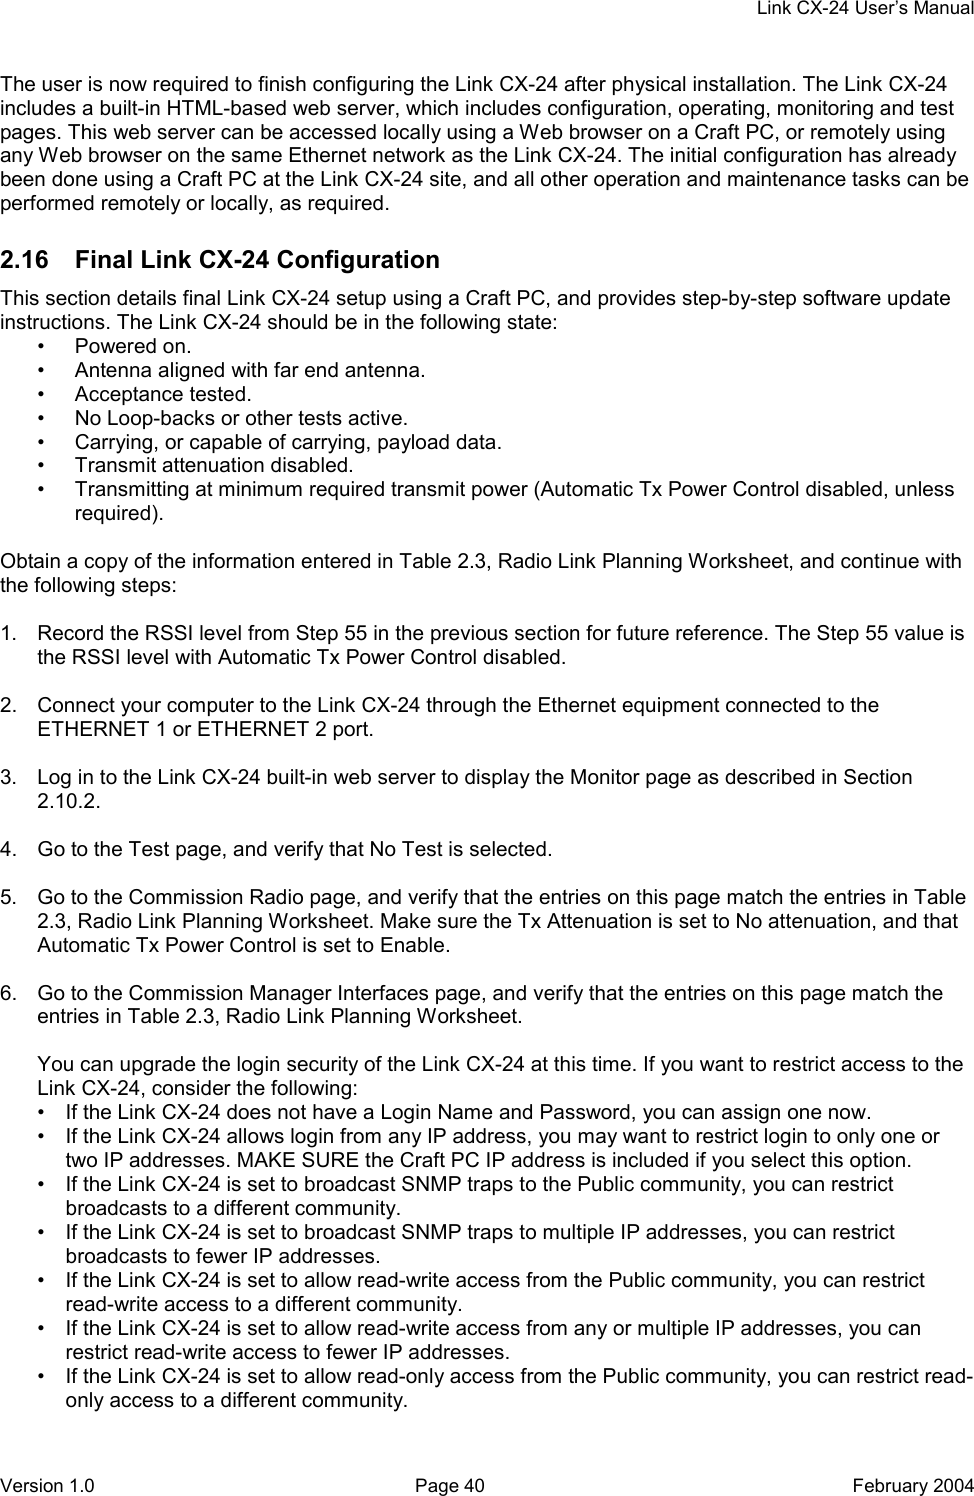     Link CX-24 User’s Manual Version 1.0  Page 40  February 2004 The user is now required to finish configuring the Link CX-24 after physical installation. The Link CX-24 includes a built-in HTML-based web server, which includes configuration, operating, monitoring and test pages. This web server can be accessed locally using a Web browser on a Craft PC, or remotely using any Web browser on the same Ethernet network as the Link CX-24. The initial configuration has already been done using a Craft PC at the Link CX-24 site, and all other operation and maintenance tasks can be performed remotely or locally, as required. 2.16  Final Link CX-24 Configuration This section details final Link CX-24 setup using a Craft PC, and provides step-by-step software update instructions. The Link CX-24 should be in the following state: • Powered on. •  Antenna aligned with far end antenna. • Acceptance tested. •  No Loop-backs or other tests active. •  Carrying, or capable of carrying, payload data. •  Transmit attenuation disabled. •  Transmitting at minimum required transmit power (Automatic Tx Power Control disabled, unless required).  Obtain a copy of the information entered in Table 2.3, Radio Link Planning Worksheet, and continue with the following steps:  1.  Record the RSSI level from Step 55 in the previous section for future reference. The Step 55 value is the RSSI level with Automatic Tx Power Control disabled.  2.  Connect your computer to the Link CX-24 through the Ethernet equipment connected to the ETHERNET 1 or ETHERNET 2 port.  3.  Log in to the Link CX-24 built-in web server to display the Monitor page as described in Section 2.10.2.  4.  Go to the Test page, and verify that No Test is selected.  5.  Go to the Commission Radio page, and verify that the entries on this page match the entries in Table 2.3, Radio Link Planning Worksheet. Make sure the Tx Attenuation is set to No attenuation, and that Automatic Tx Power Control is set to Enable.  6.  Go to the Commission Manager Interfaces page, and verify that the entries on this page match the entries in Table 2.3, Radio Link Planning Worksheet.  You can upgrade the login security of the Link CX-24 at this time. If you want to restrict access to the Link CX-24, consider the following: •  If the Link CX-24 does not have a Login Name and Password, you can assign one now. •  If the Link CX-24 allows login from any IP address, you may want to restrict login to only one or two IP addresses. MAKE SURE the Craft PC IP address is included if you select this option. •  If the Link CX-24 is set to broadcast SNMP traps to the Public community, you can restrict broadcasts to a different community. •  If the Link CX-24 is set to broadcast SNMP traps to multiple IP addresses, you can restrict broadcasts to fewer IP addresses. •  If the Link CX-24 is set to allow read-write access from the Public community, you can restrict read-write access to a different community. •  If the Link CX-24 is set to allow read-write access from any or multiple IP addresses, you can restrict read-write access to fewer IP addresses. •  If the Link CX-24 is set to allow read-only access from the Public community, you can restrict read-only access to a different community. 